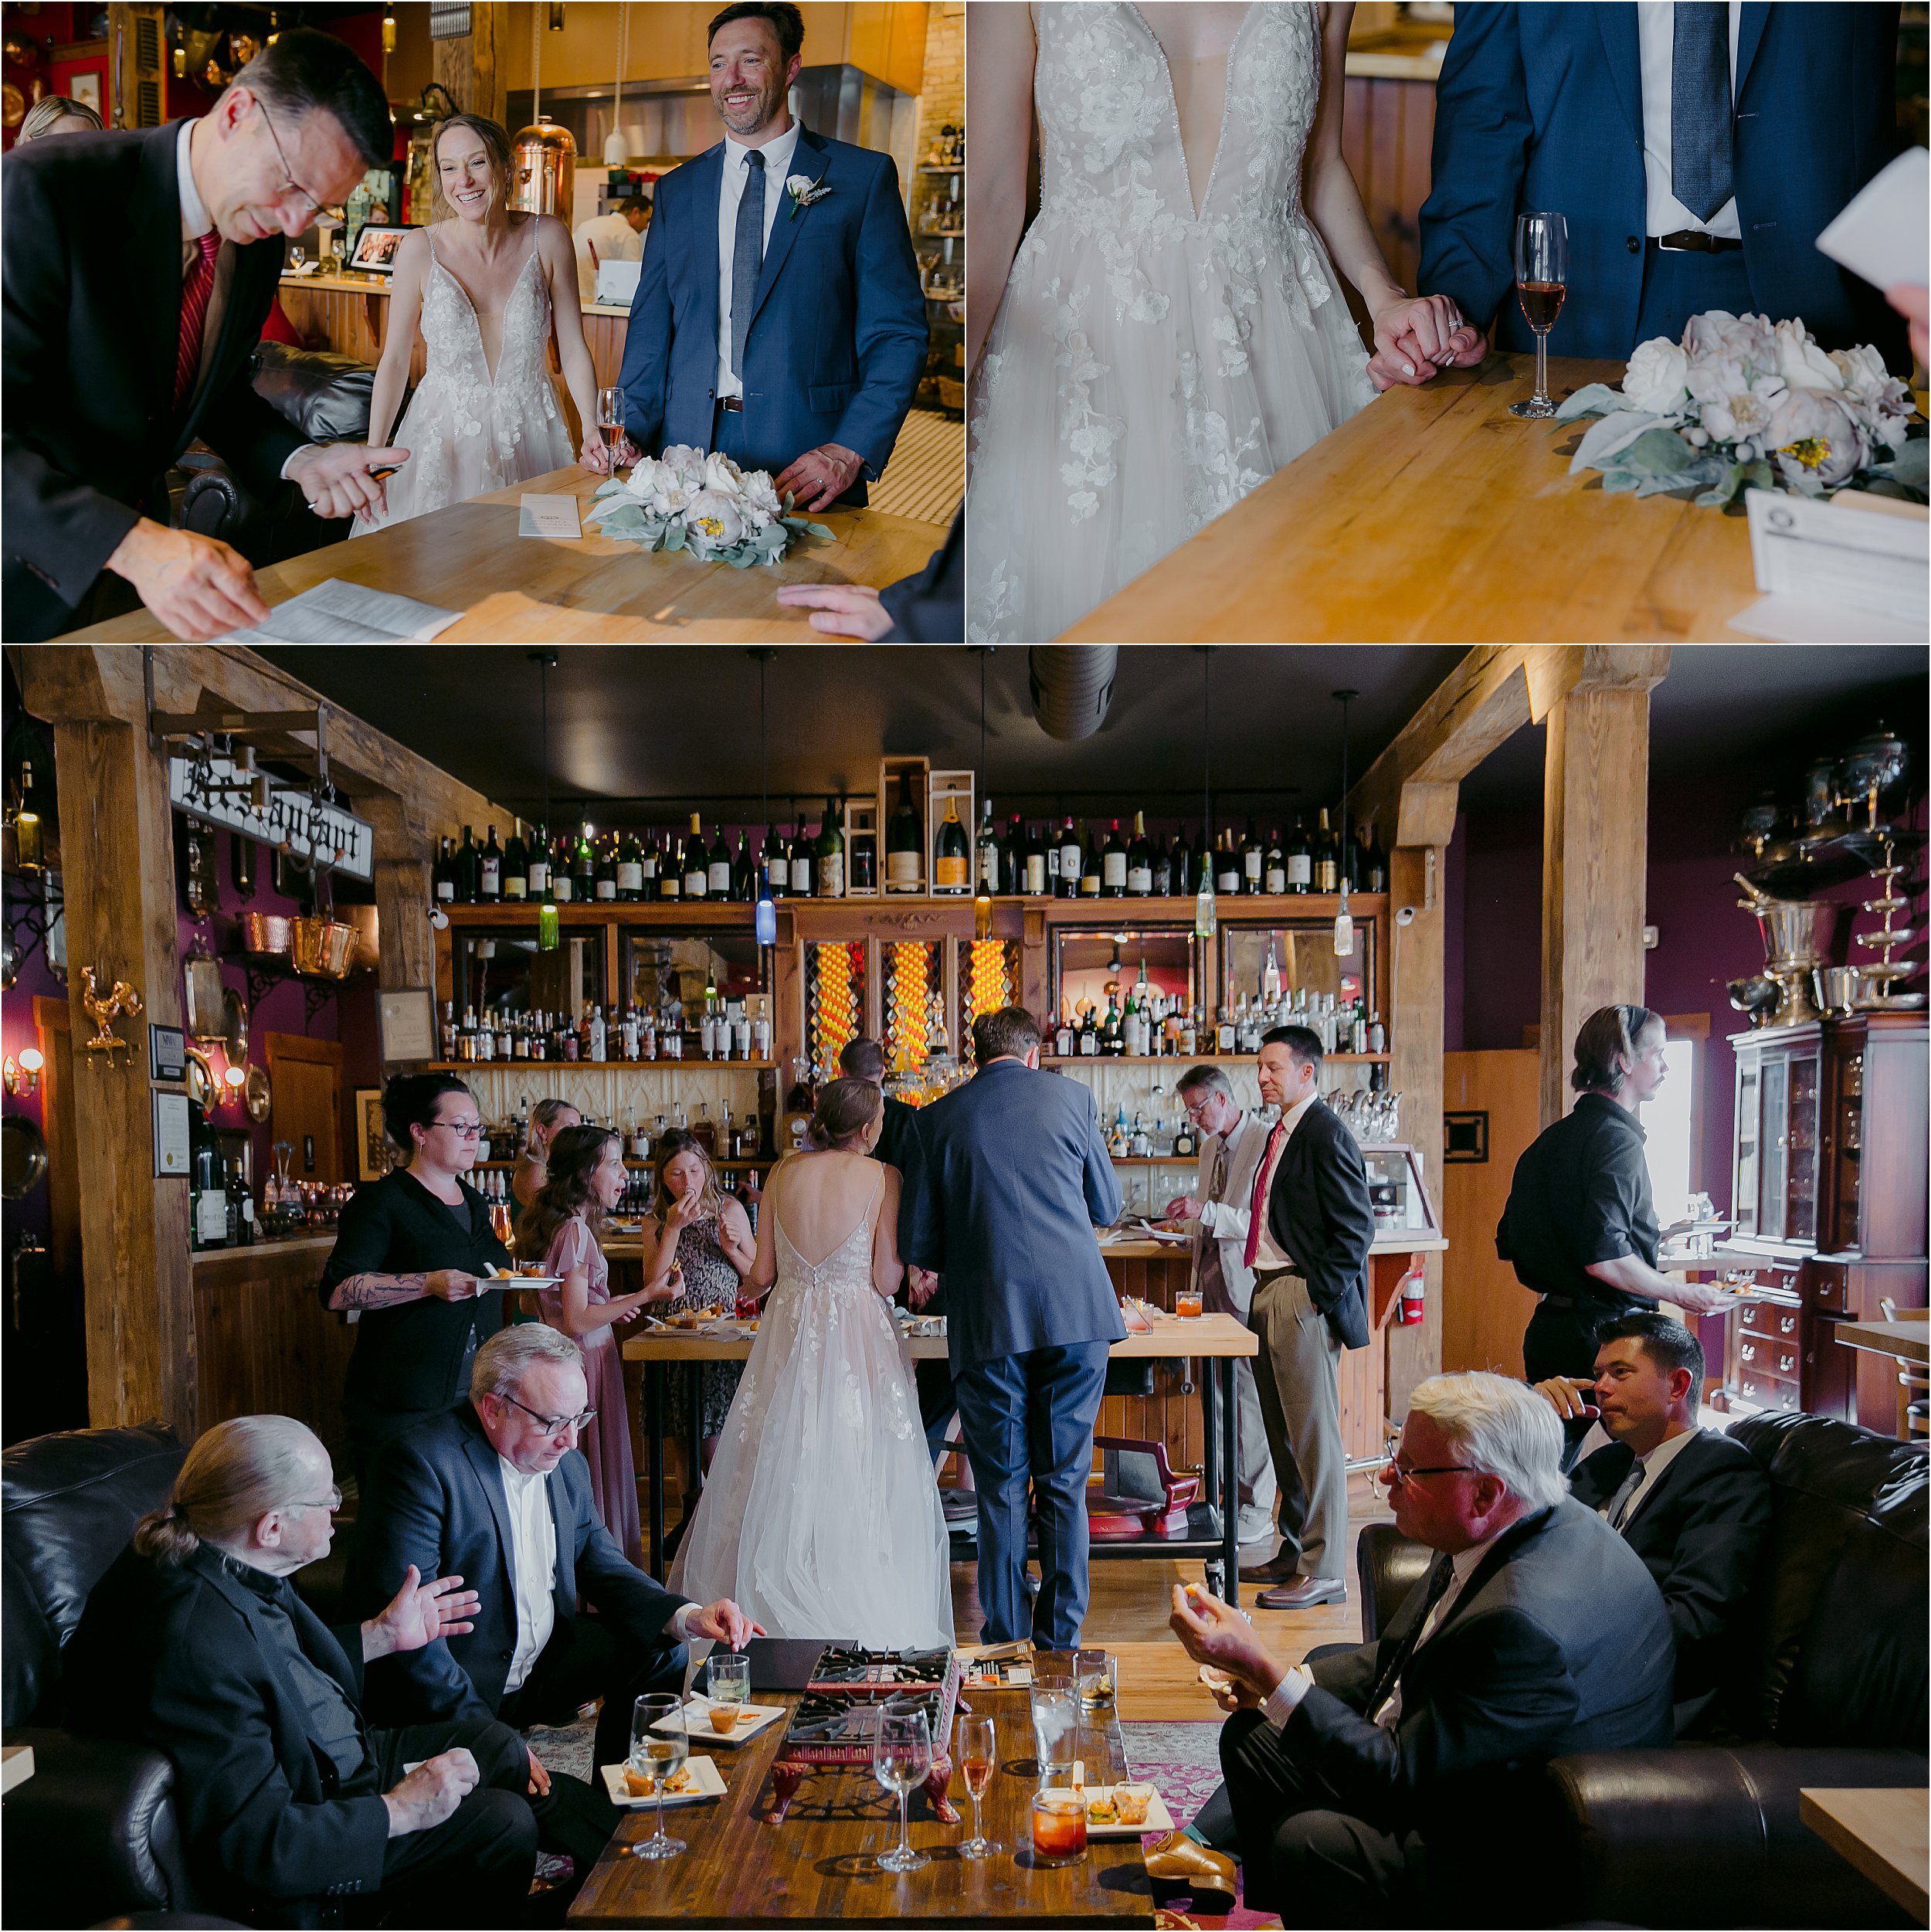 29-chefs-table-cocktail-hour-signing-marriage-liscense.JPG